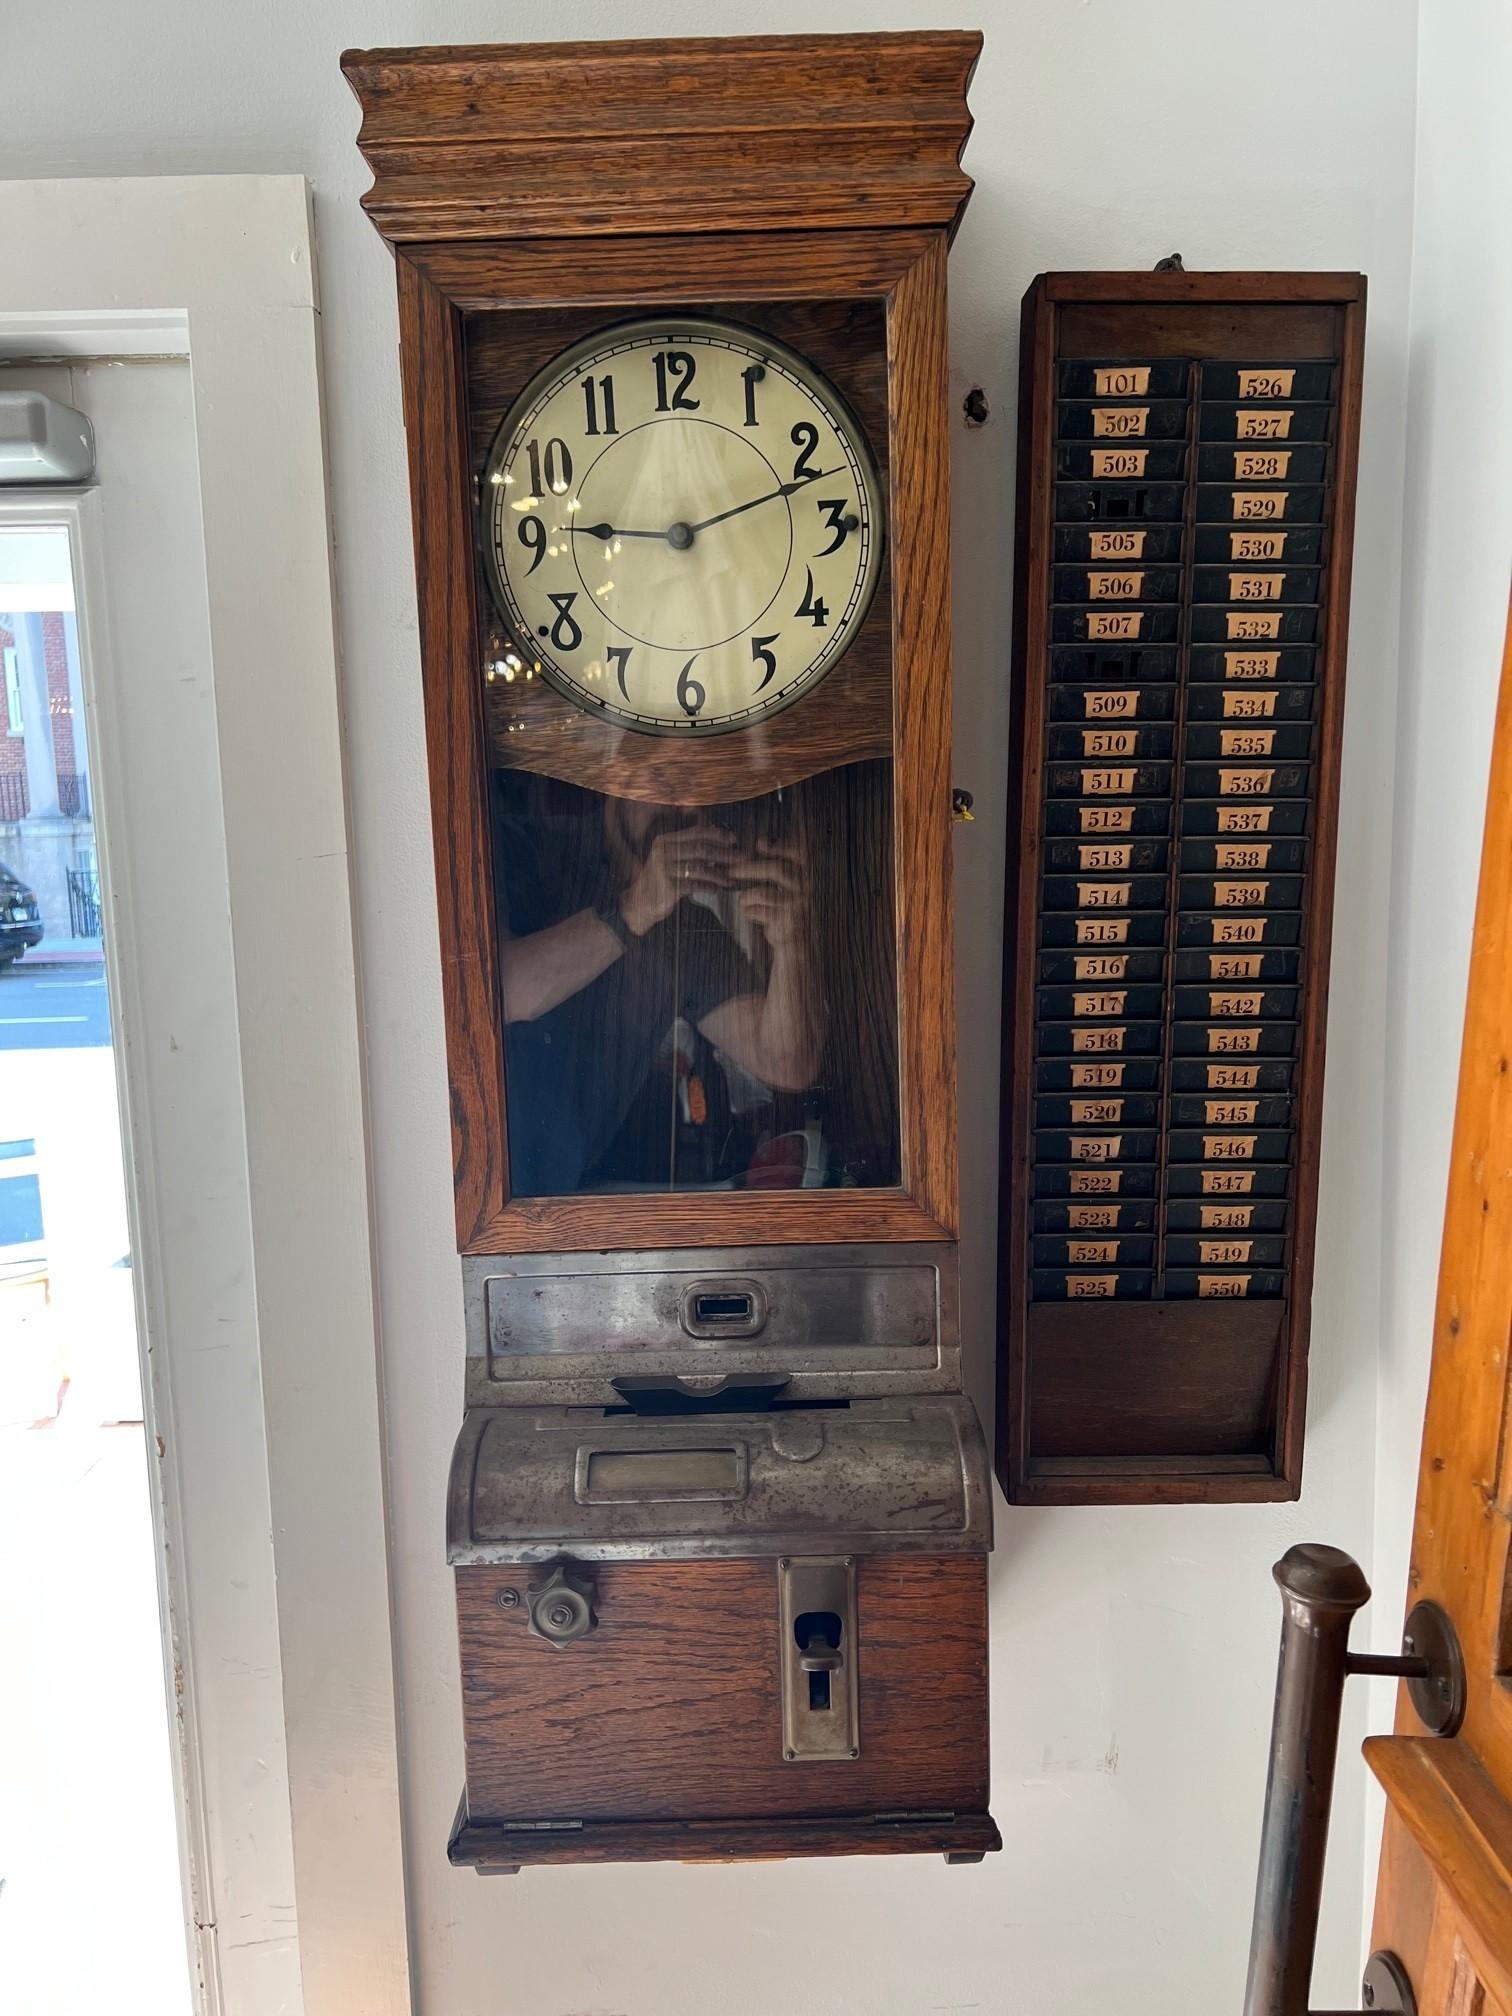 A great piece of American history, antique oak wall time clock with a workers card file. This is a nice find from an Upstate NY home original used in a factory in Upstate NY. I do not see a manufacturer's name on the clock but it is very similar to